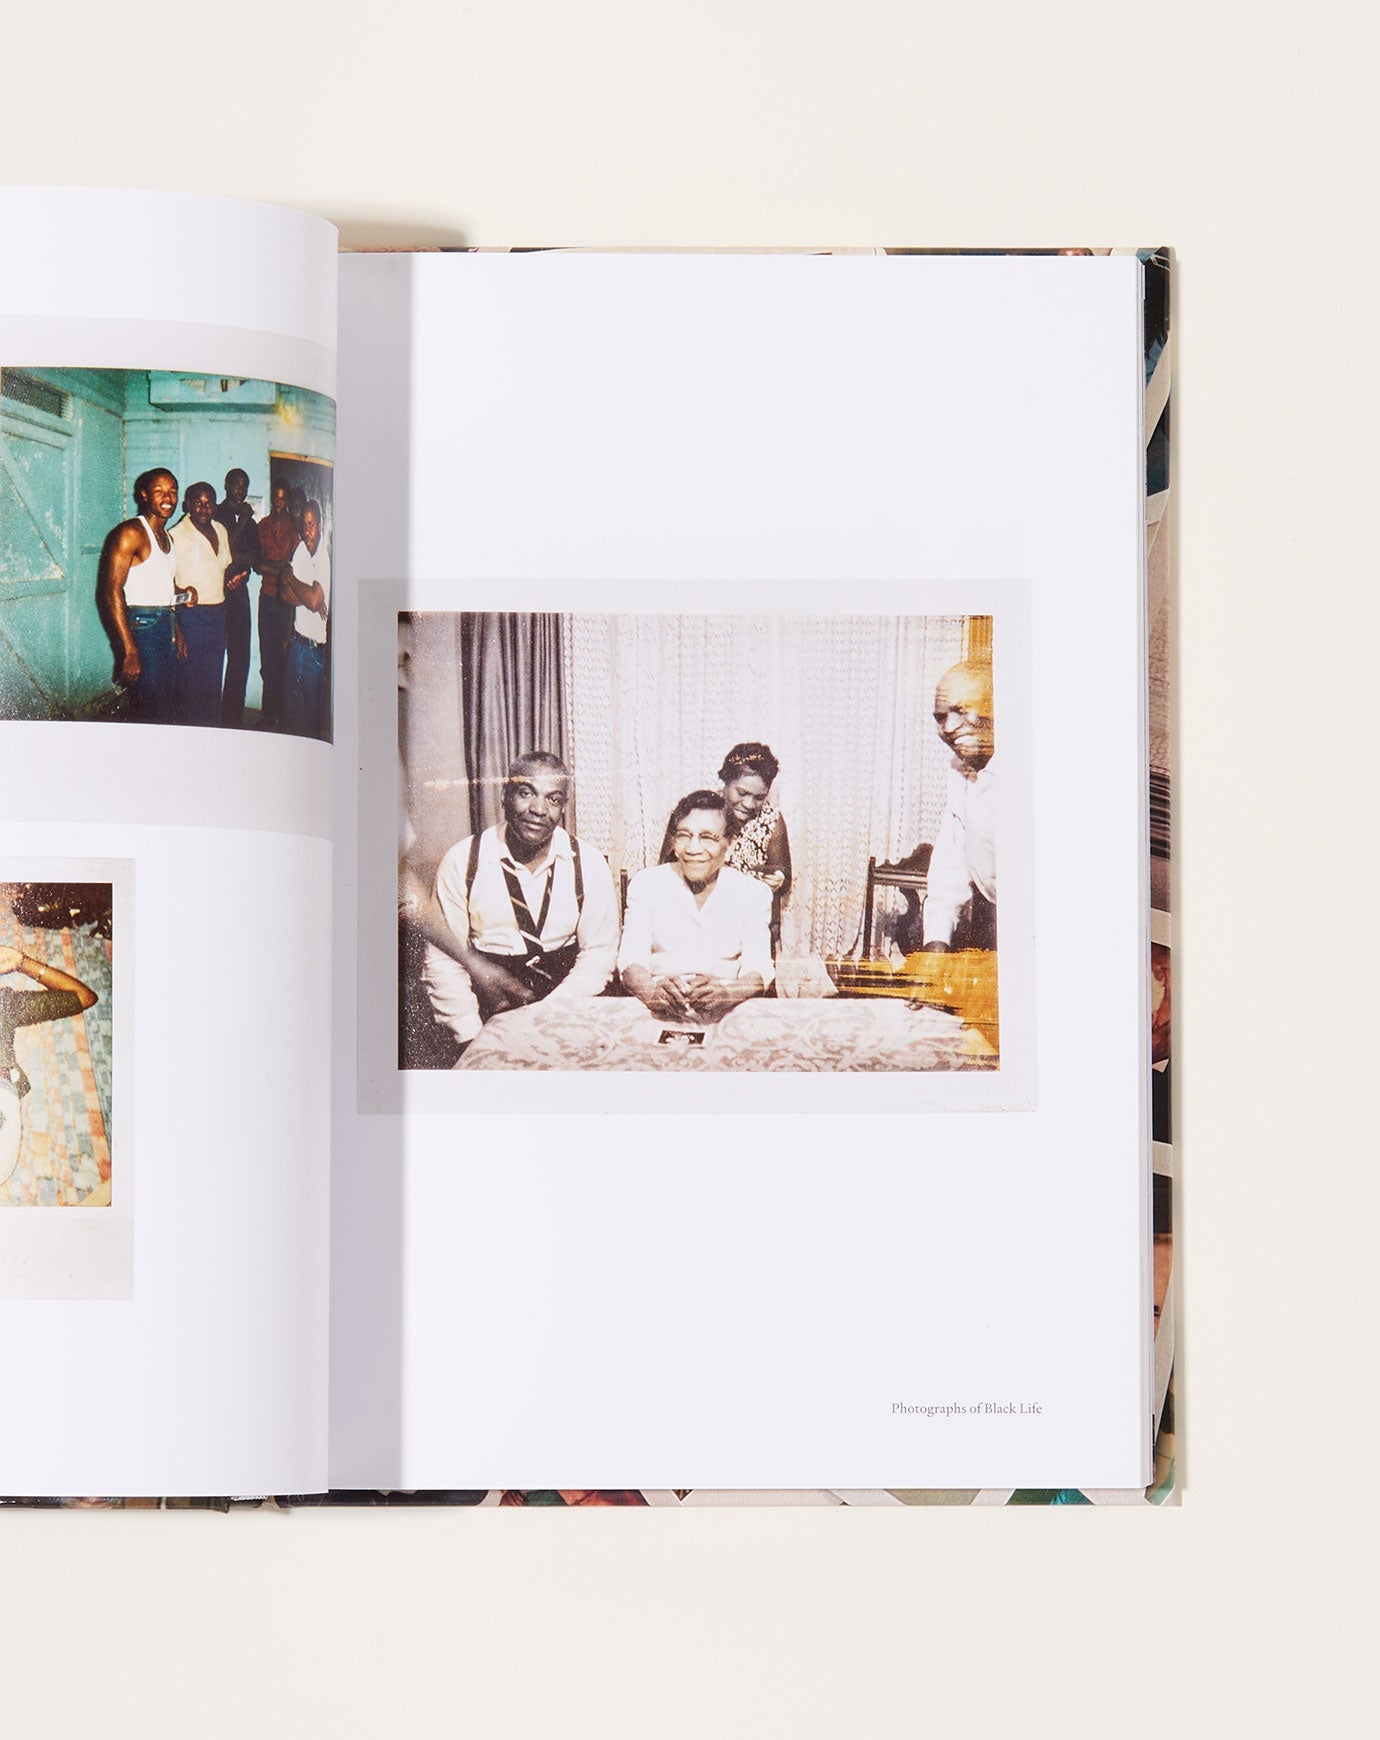 Artbook What Matters Most: Photographs of Black Life